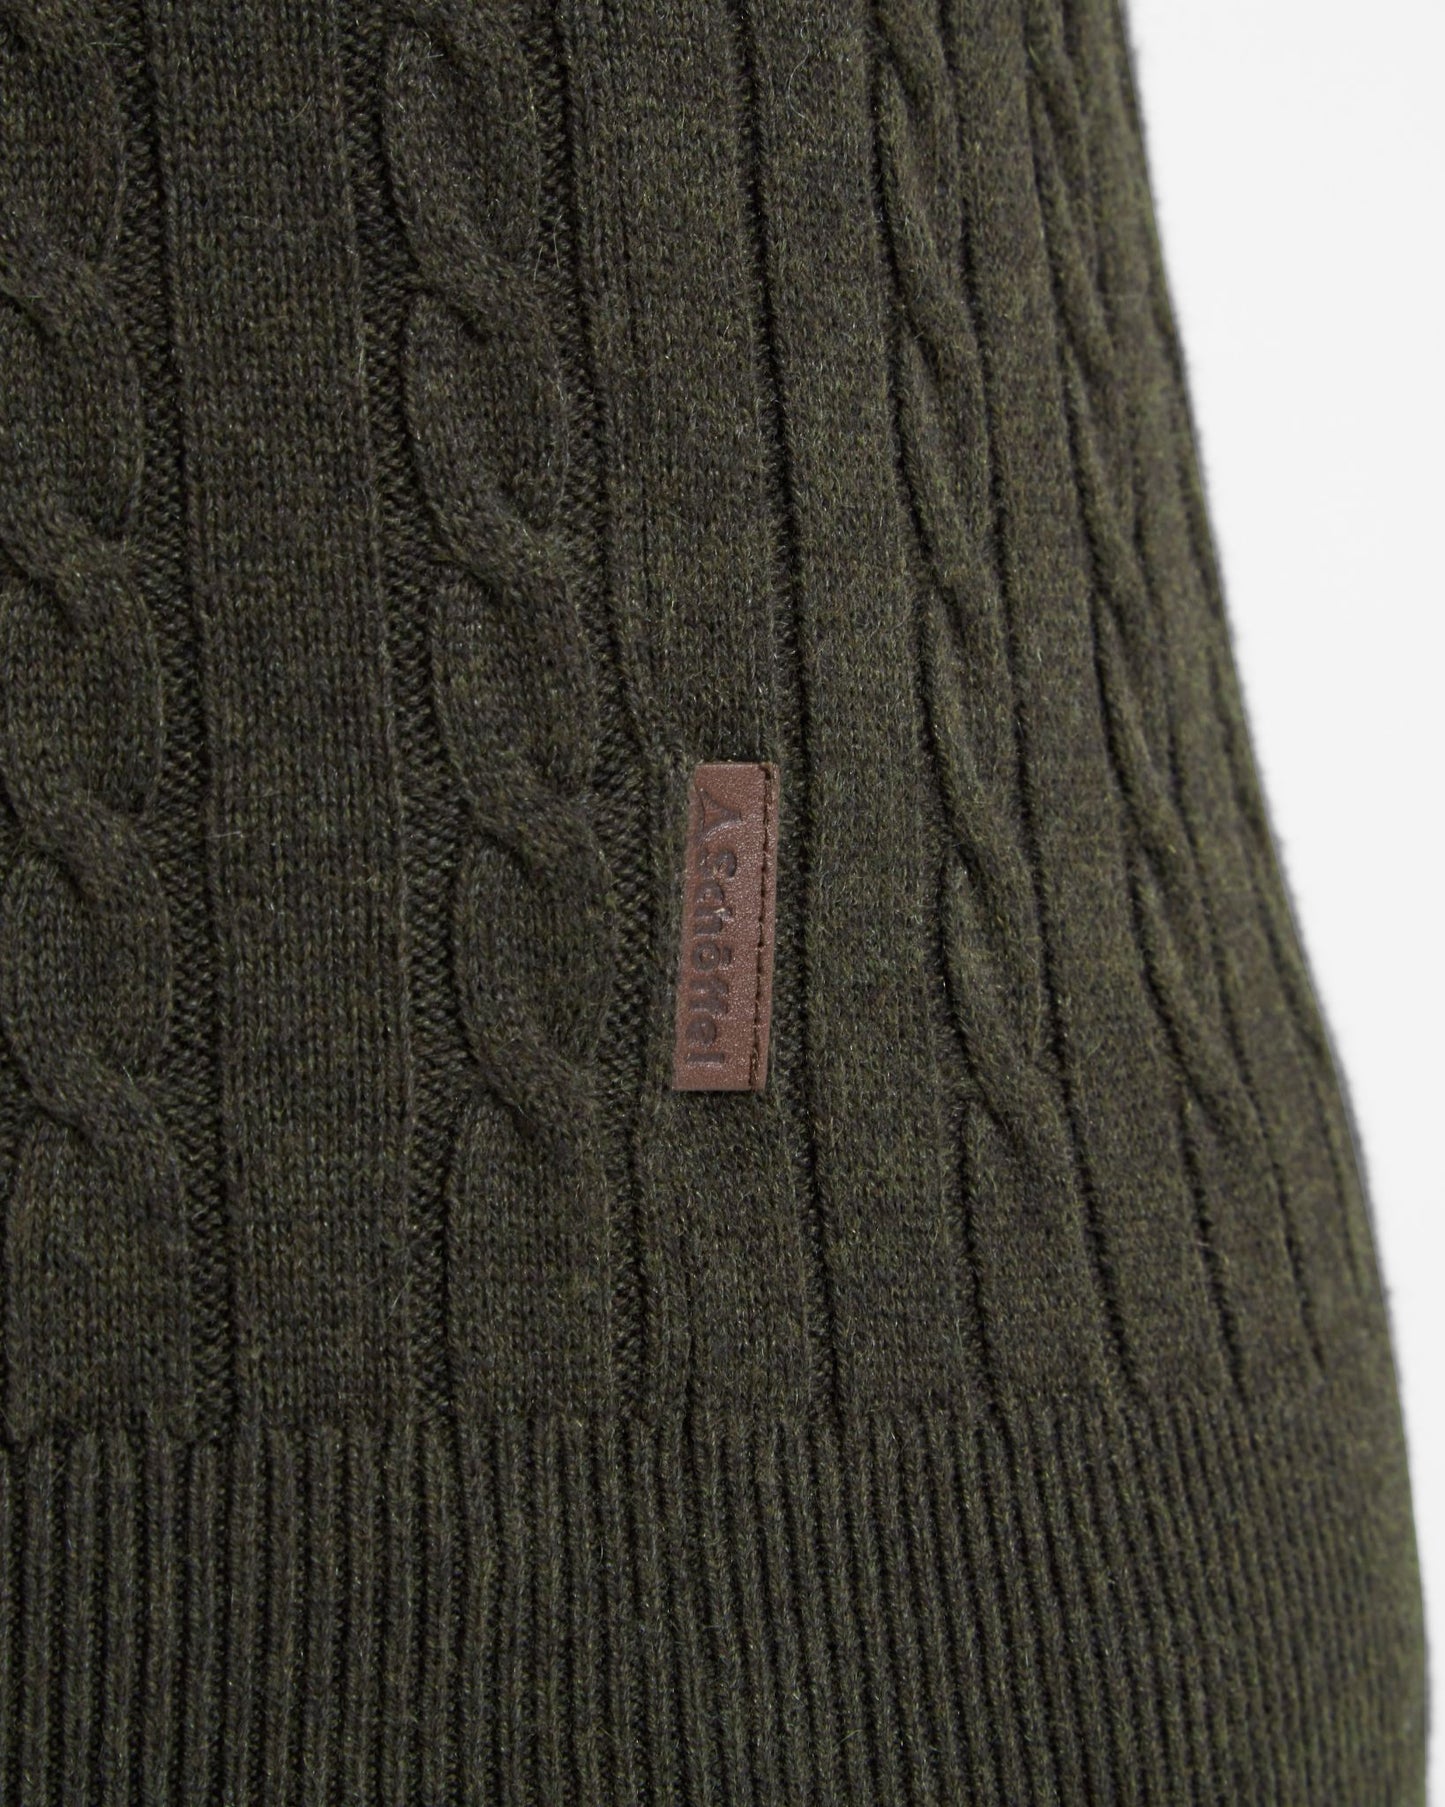 Cotton Cashmere Cable 1/4 Zip Jumper - Loden Green